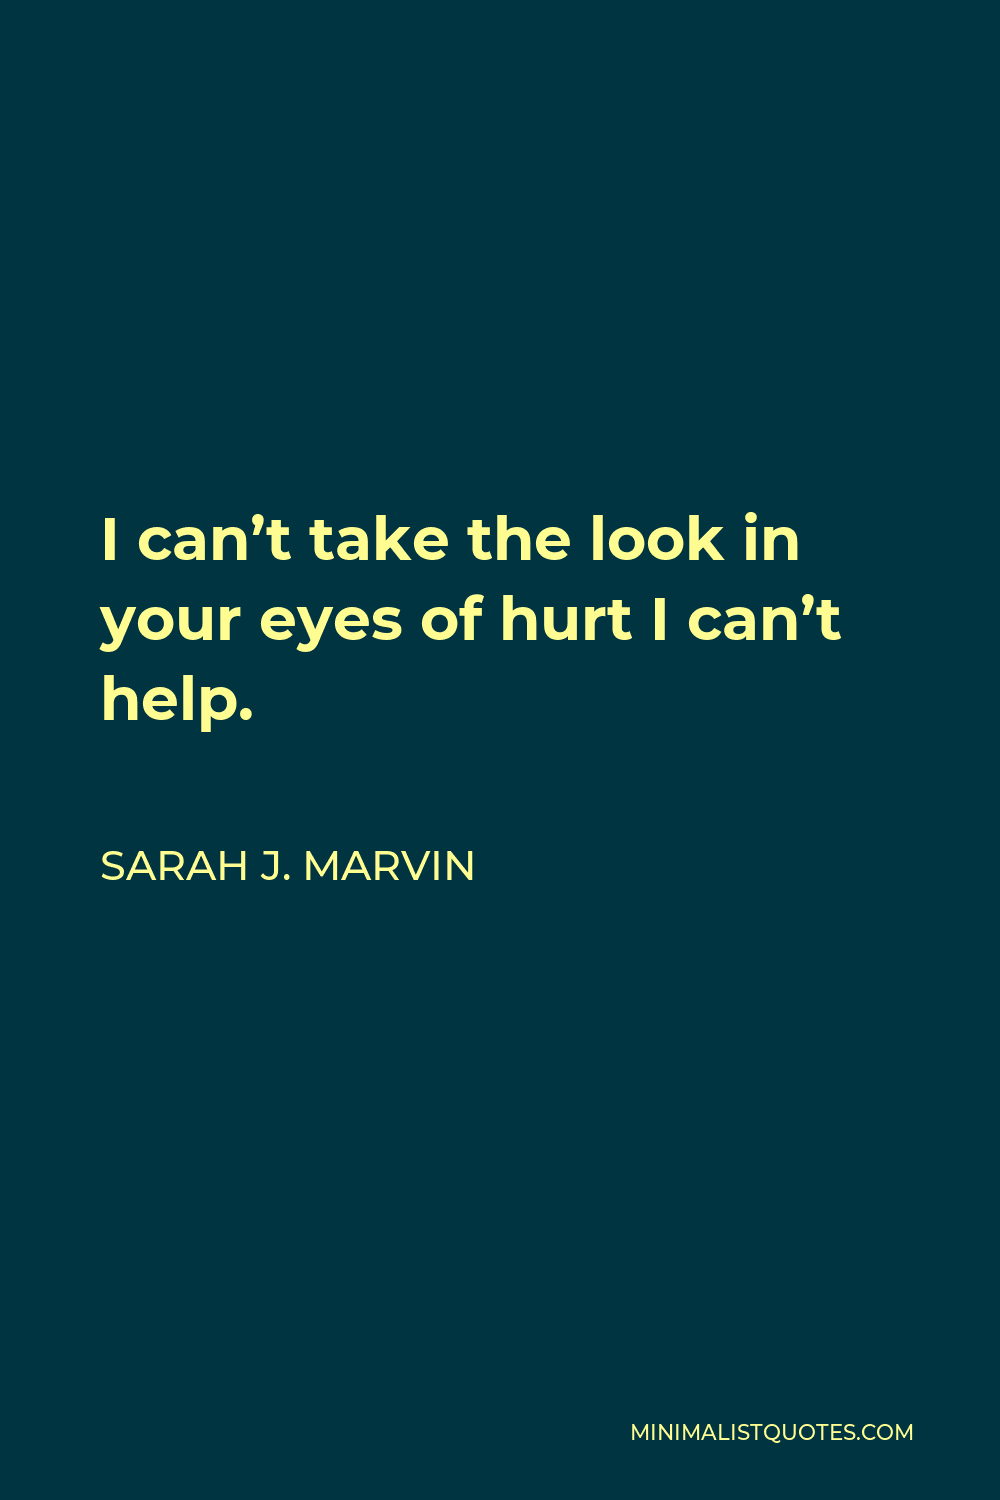 Sarah J. Marvin Quote - I can’t take the look in your eyes of hurt I can’t help.